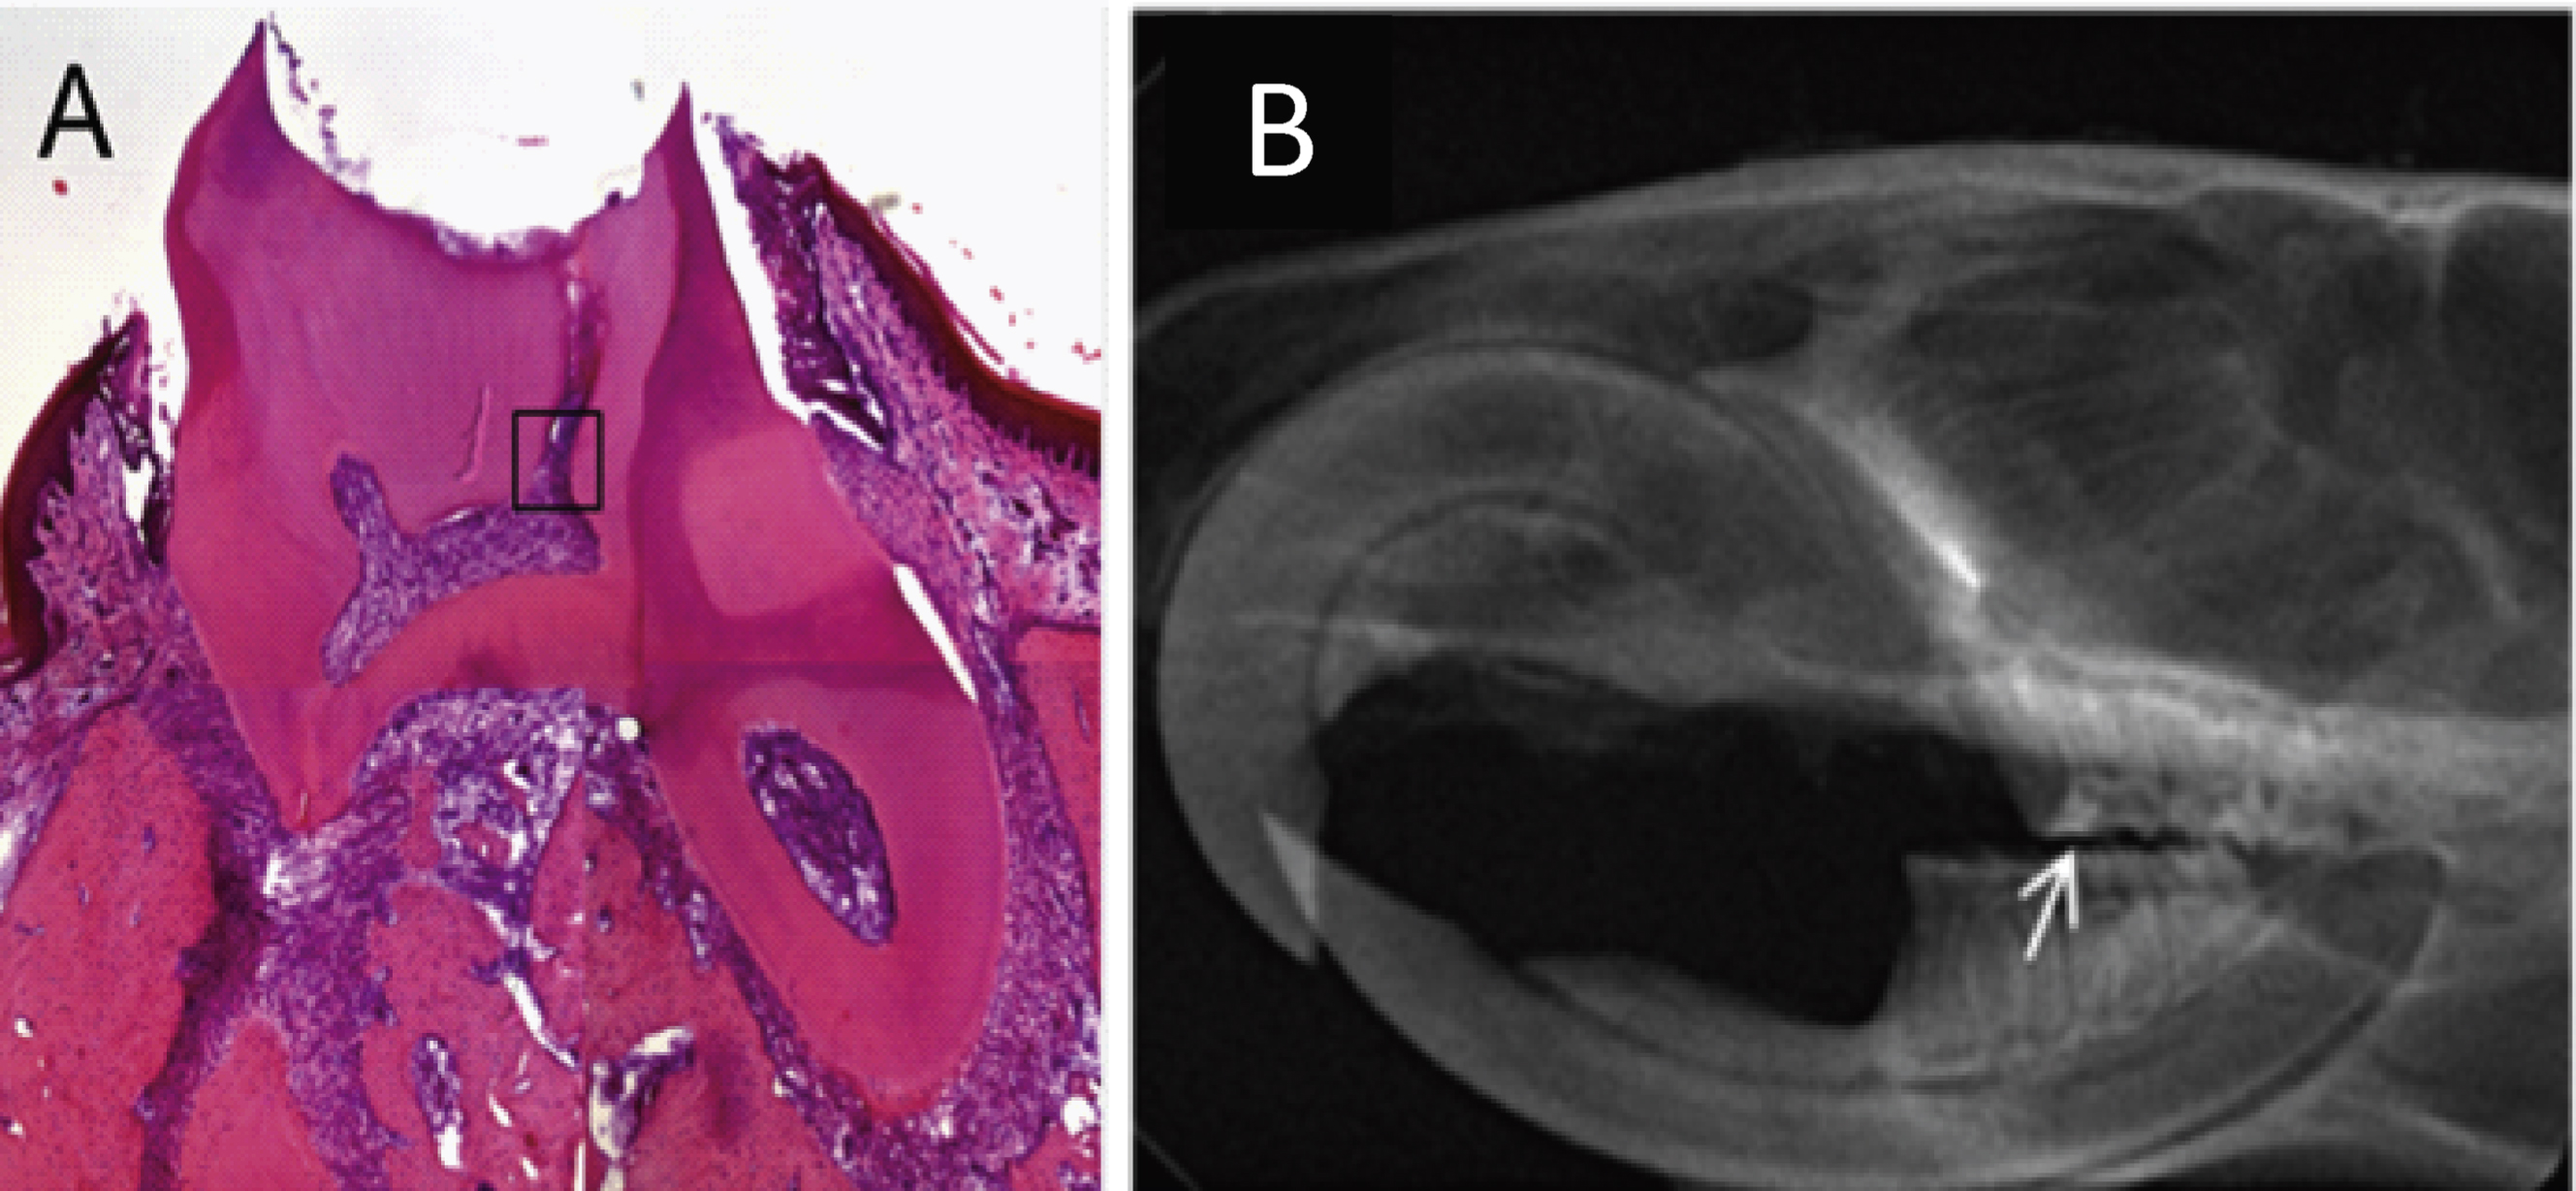 First molar of an adult rat three weeks after human dental stem cell implantation into the prepared pulp cavity: (A) HE-staining of a cross section from the molar showing the access cavity into the pulp chamber with inserted resin filling (see region of interest); (B) x-ray of the lower and upper jaw, lateral view; arrow shows position of the resin filling of the first molar.